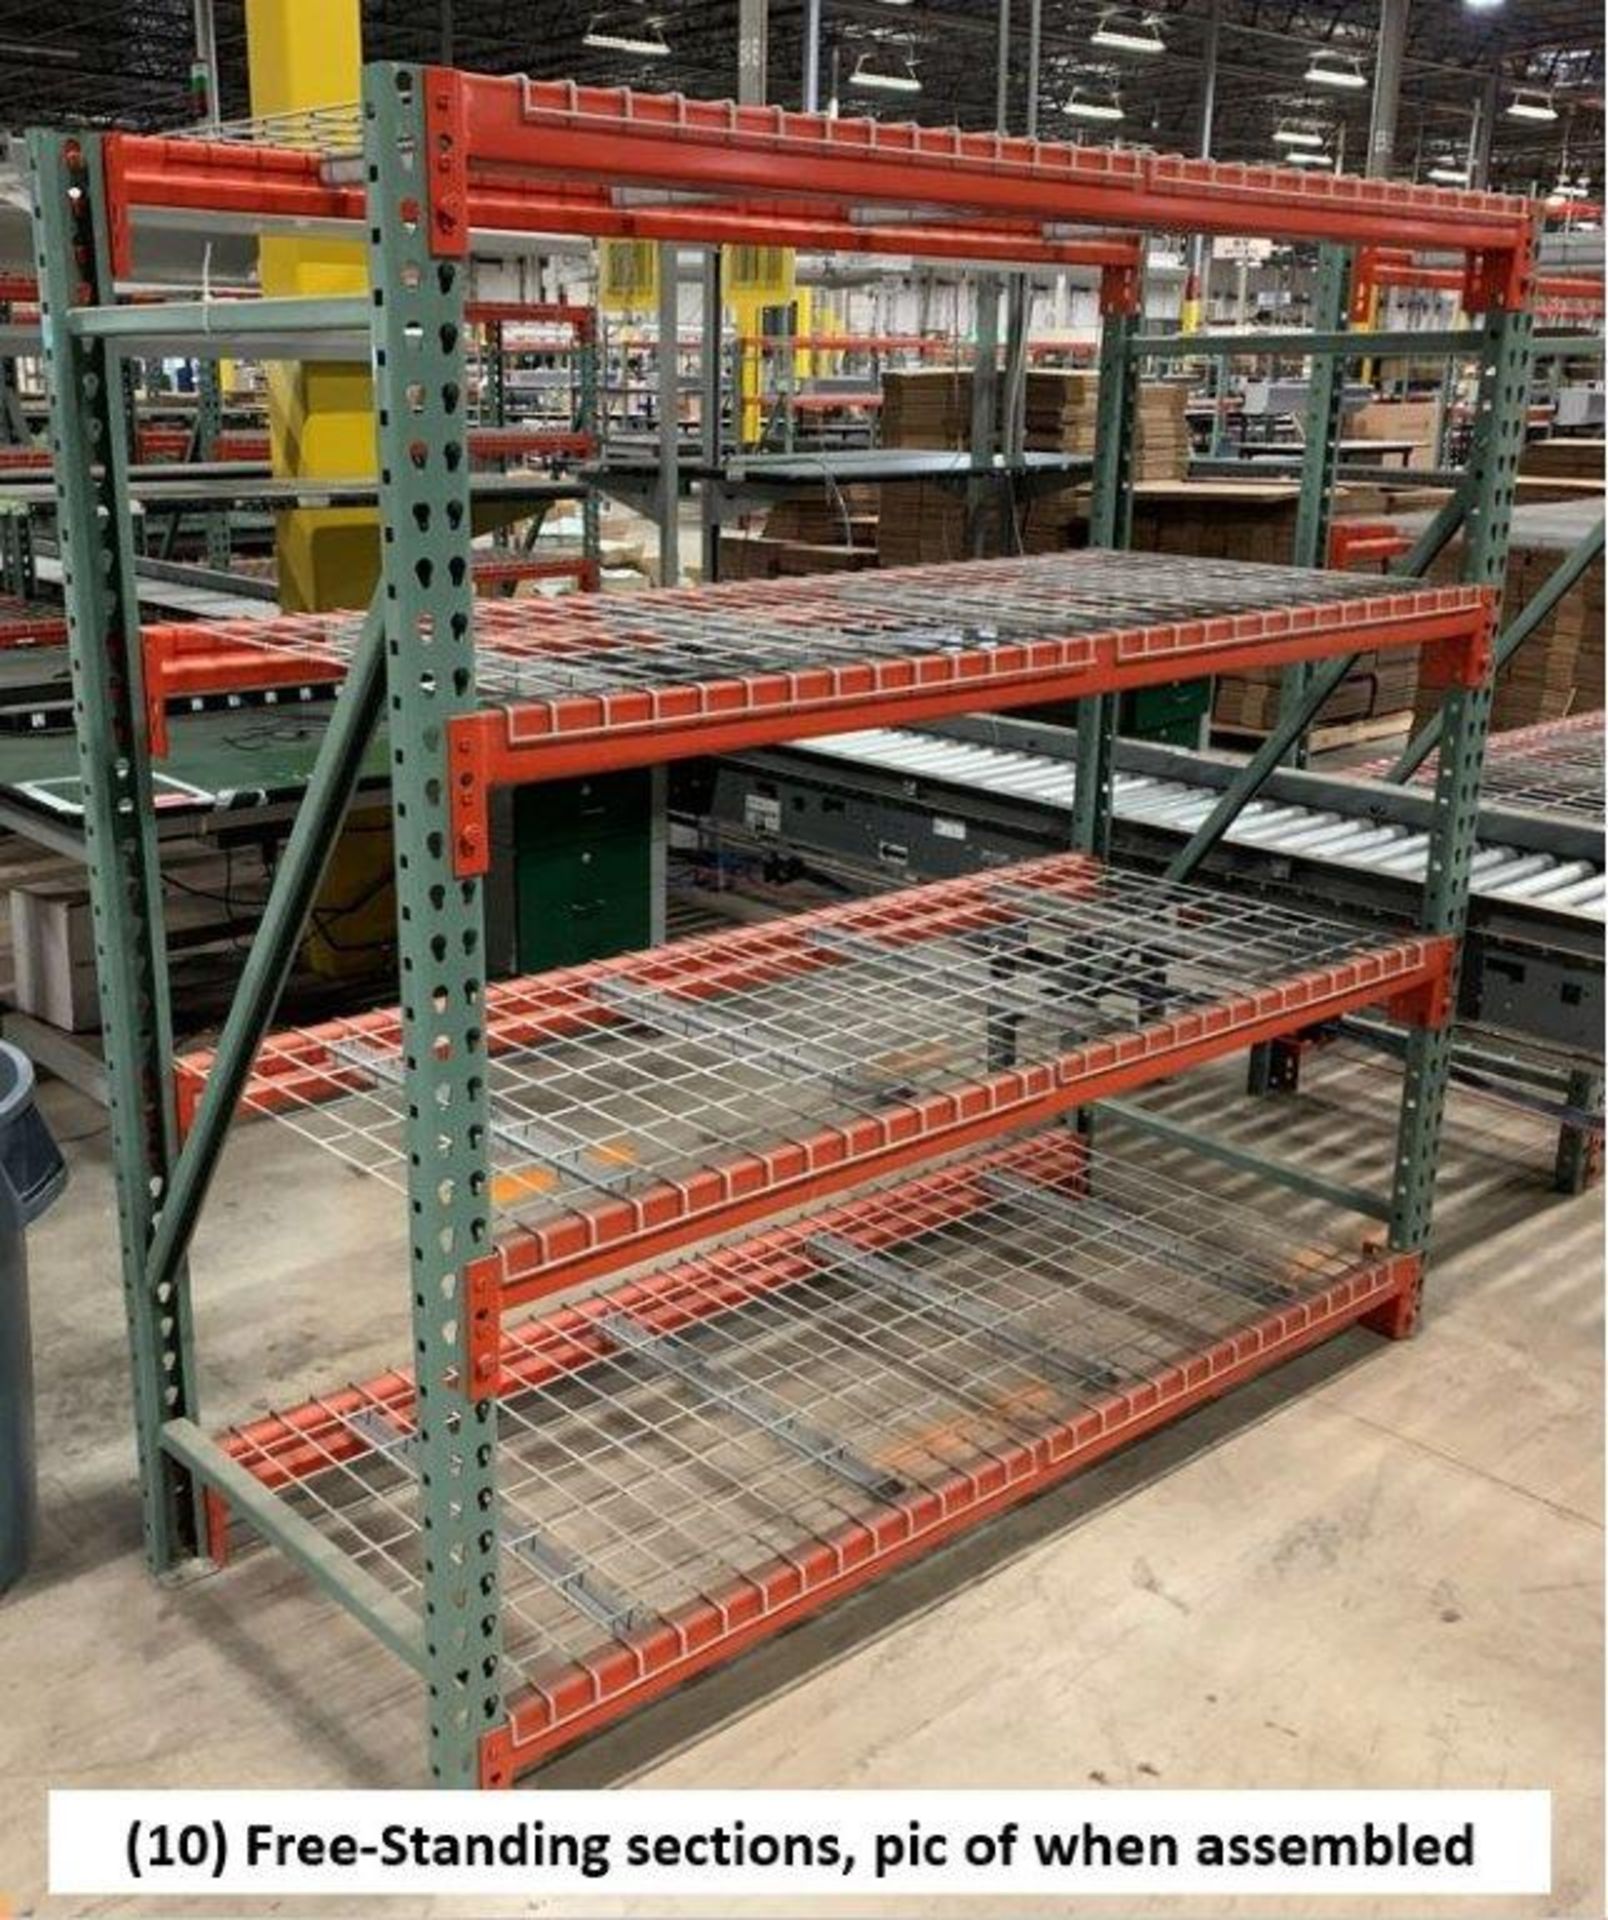 FREE-STANDING SECTIONS 30" X 72" X 72" HIGH ADJUSTABLE BEAM WIRE DECK PALLET RACK CONSISTING OF; - Image 2 of 6